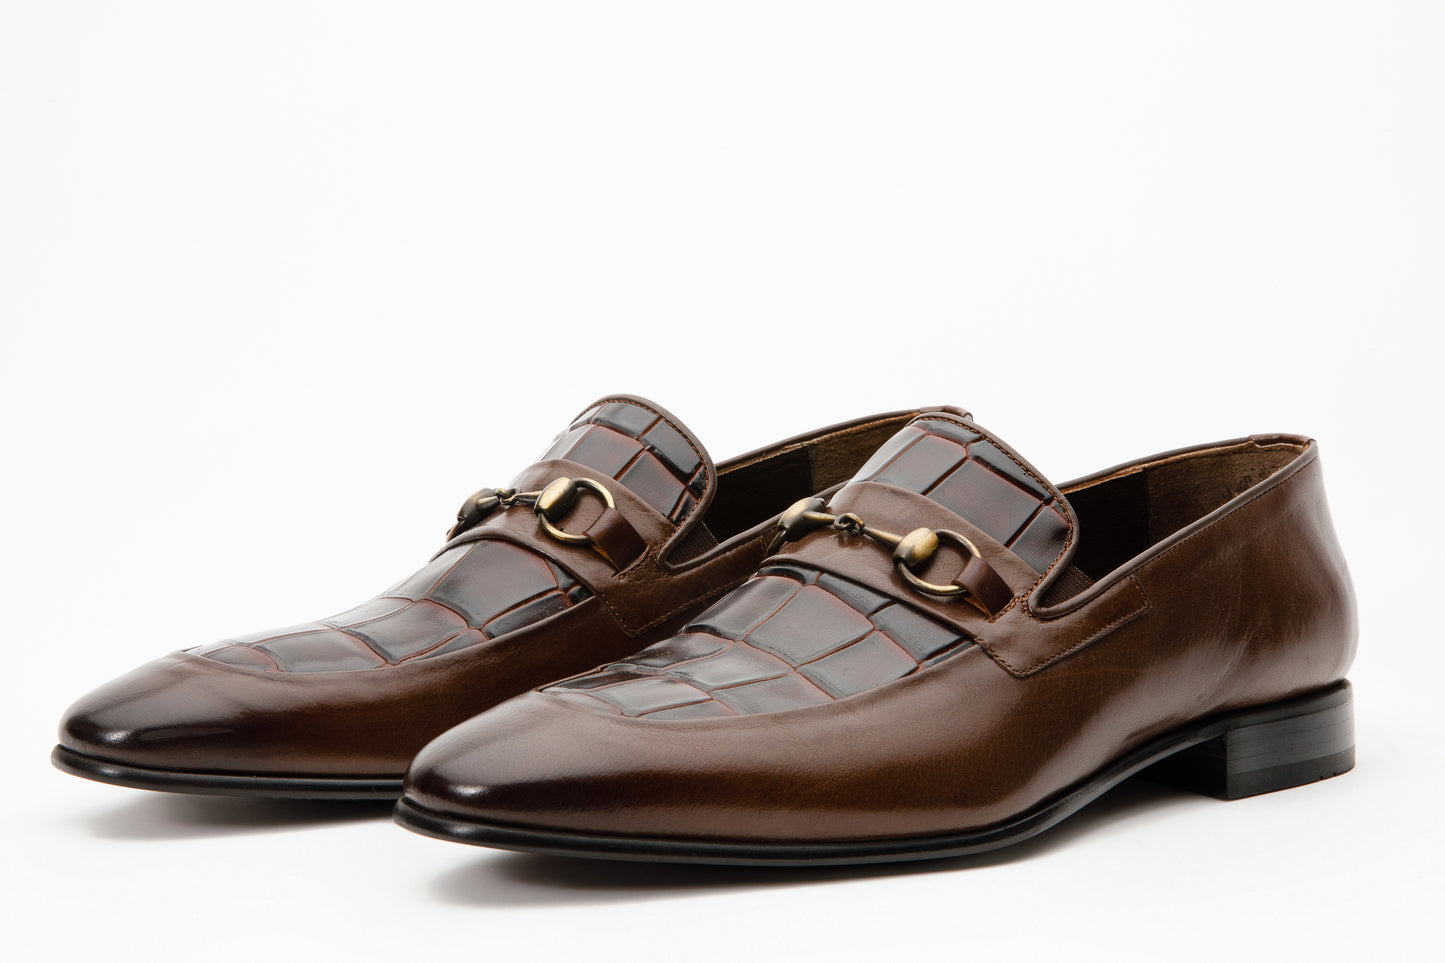 The Pusan Brown Leather Bit Loafer Men Shoe